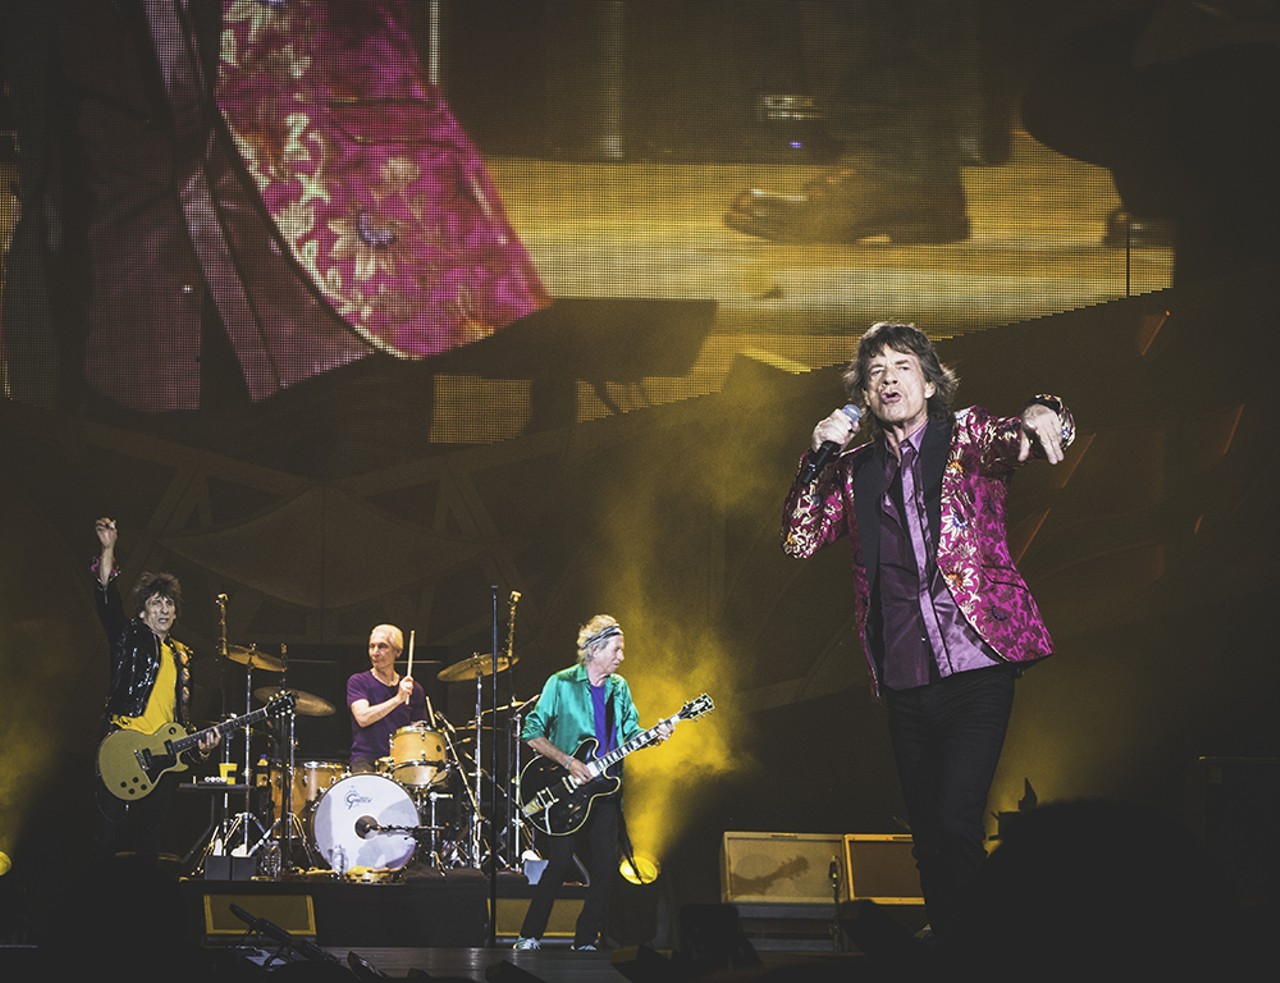 Wildest photos from the Rolling Stones at the Orlando Citrus Bowl - PHOTO BY CHRISTOPHER GARCIA